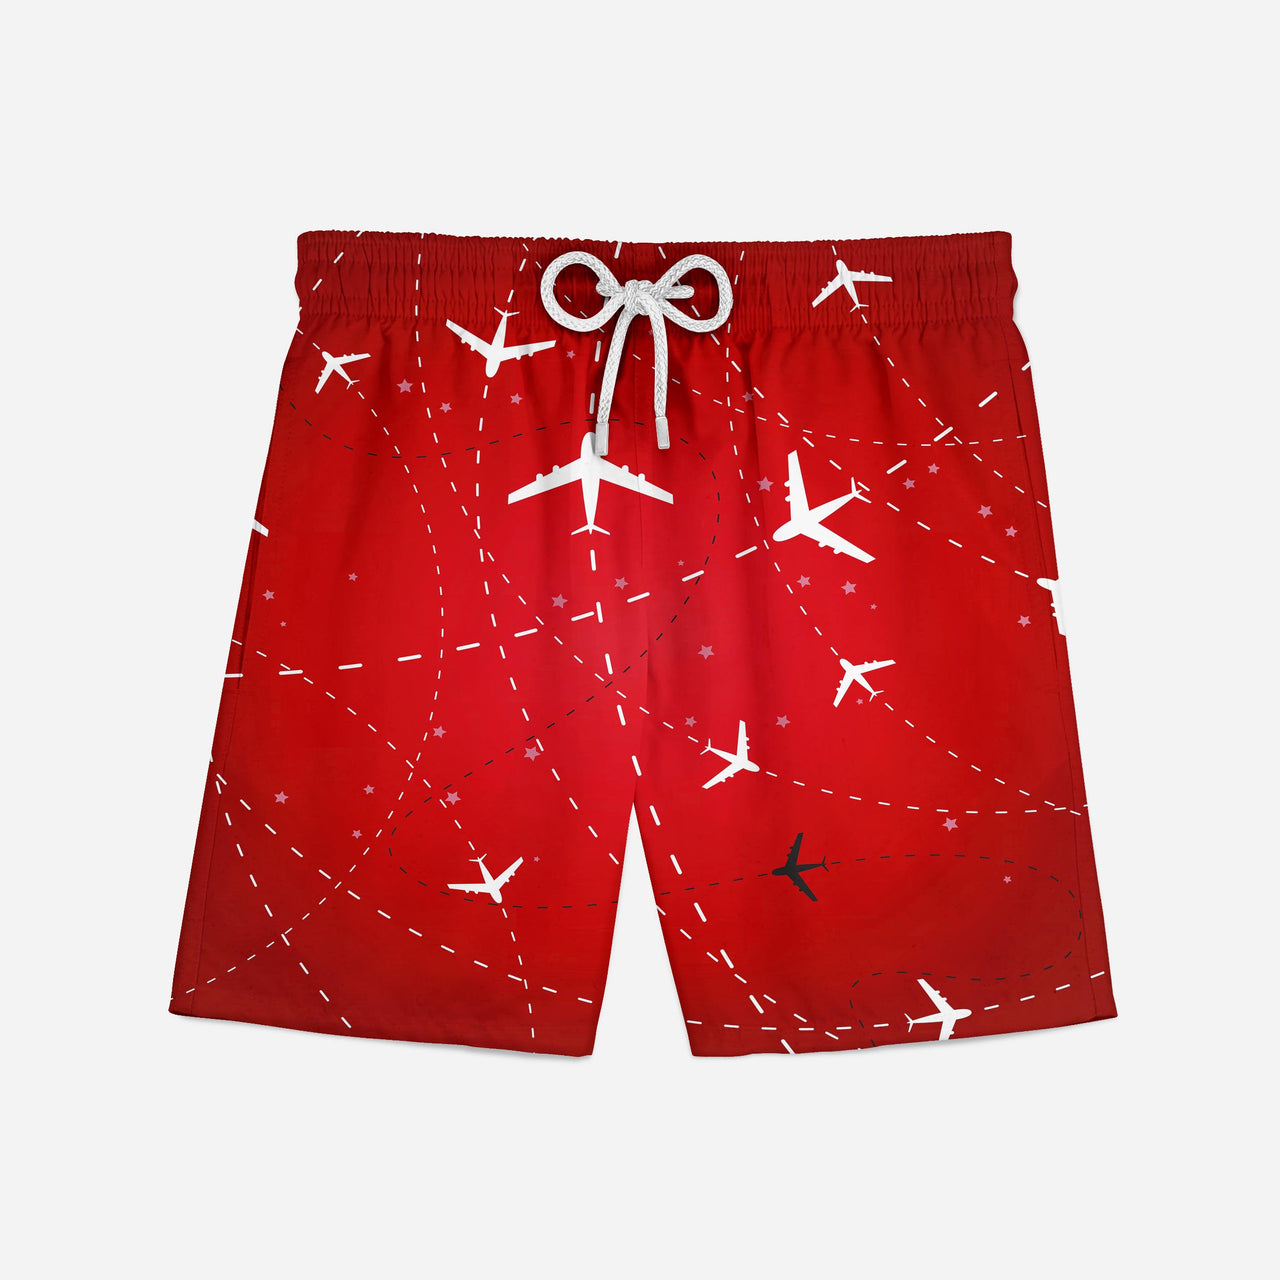 Travelling with Aircraft (Red) Designed Swim Trunks & Shorts